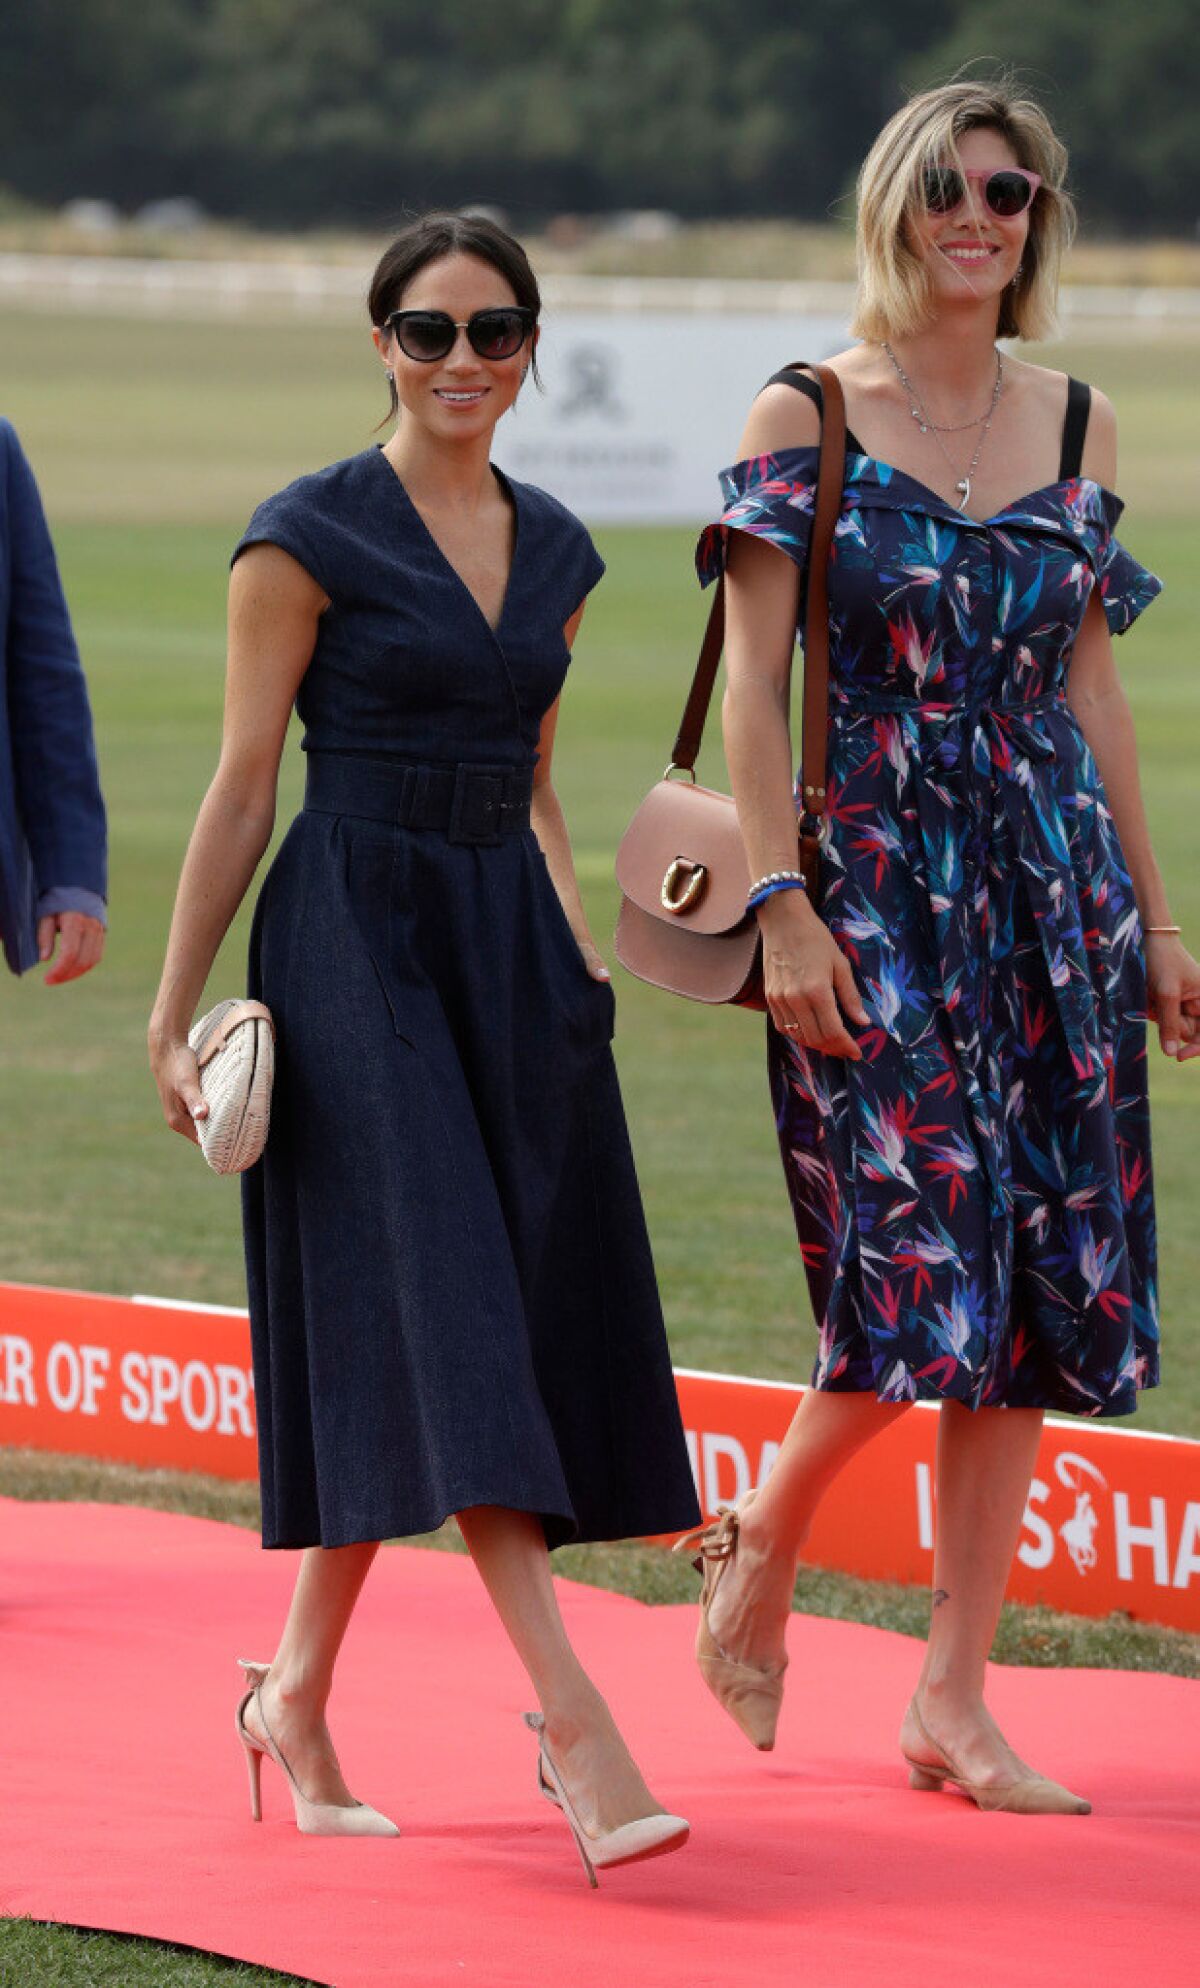 Meghan, Duchess of Sussex arrives with Delfina Blaquier, the wife of Nacho Figueras at the Royal County of Berkshire Polo Club in Windsor, England, to watch the Sentebale ISPS Handa Polo Cup where her husband Britain's Prince Harry is due to play.